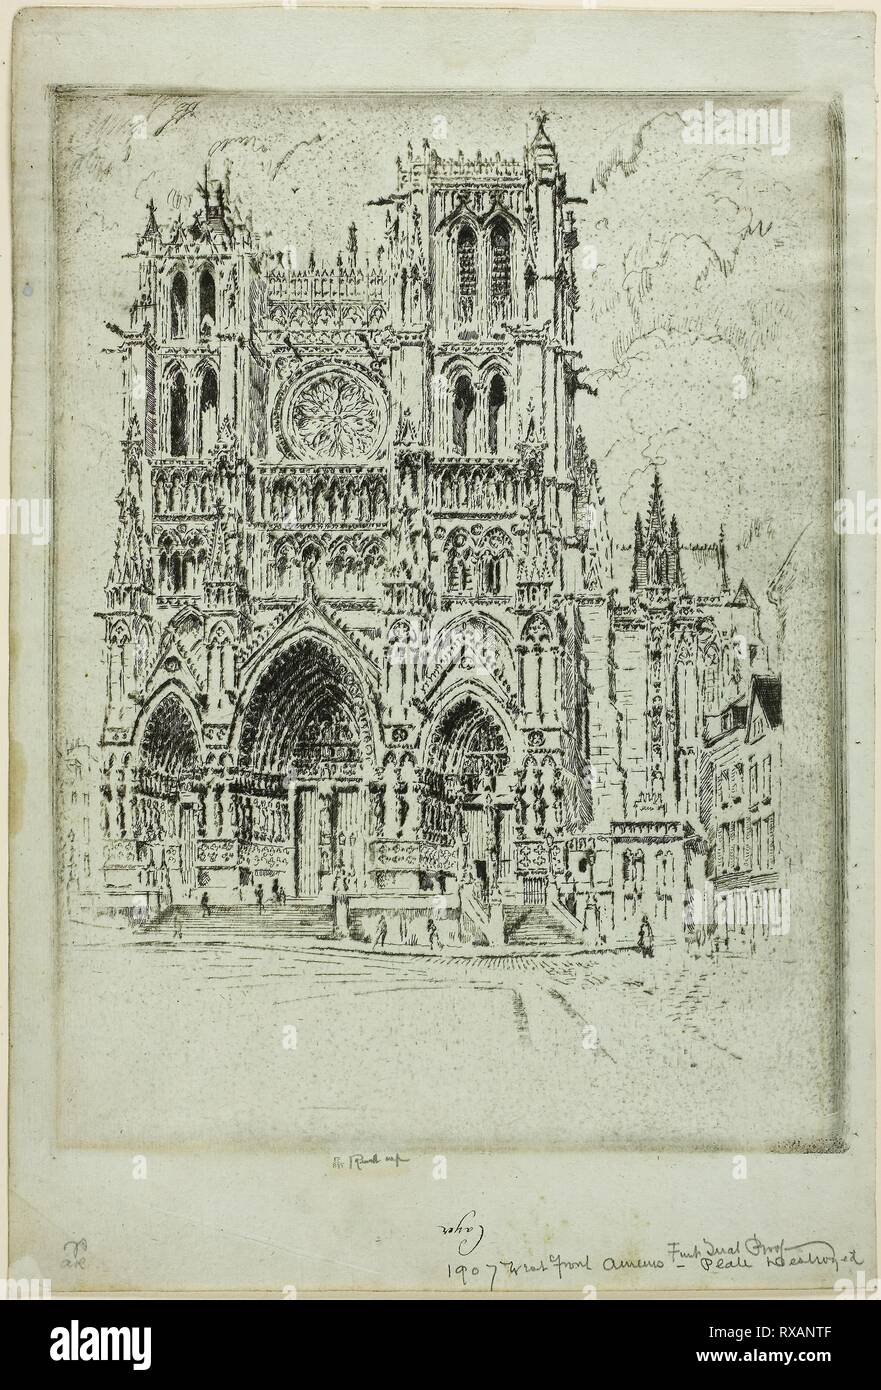 The West Front, Amiens. Joseph Pennell; American, 1857-1926. Date: 1906-1907. Dimensions: 299 x 225 mm (image); 361 x 244 mm (sheet). Etching on blue-gray laid paper. Origin: United States. Museum: The Chicago Art Institute. Stock Photo